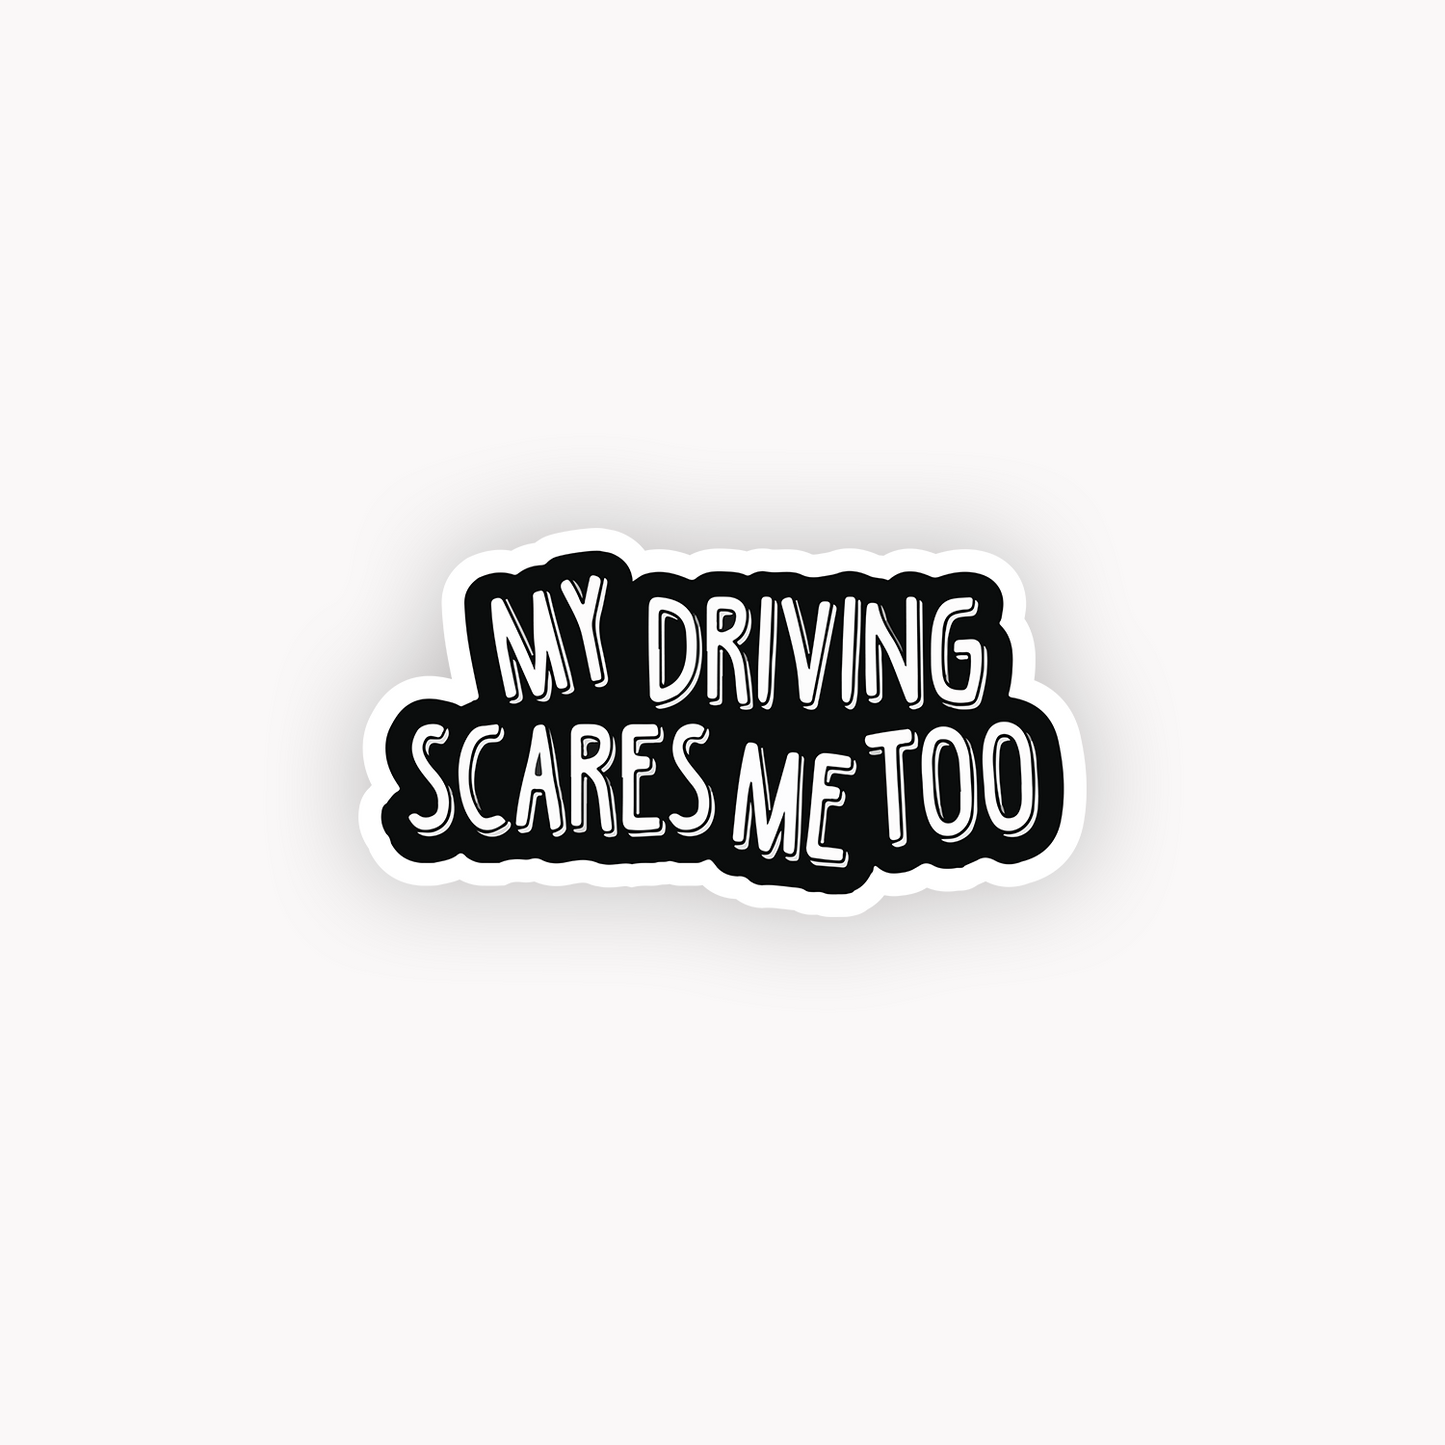 My driving scares me too